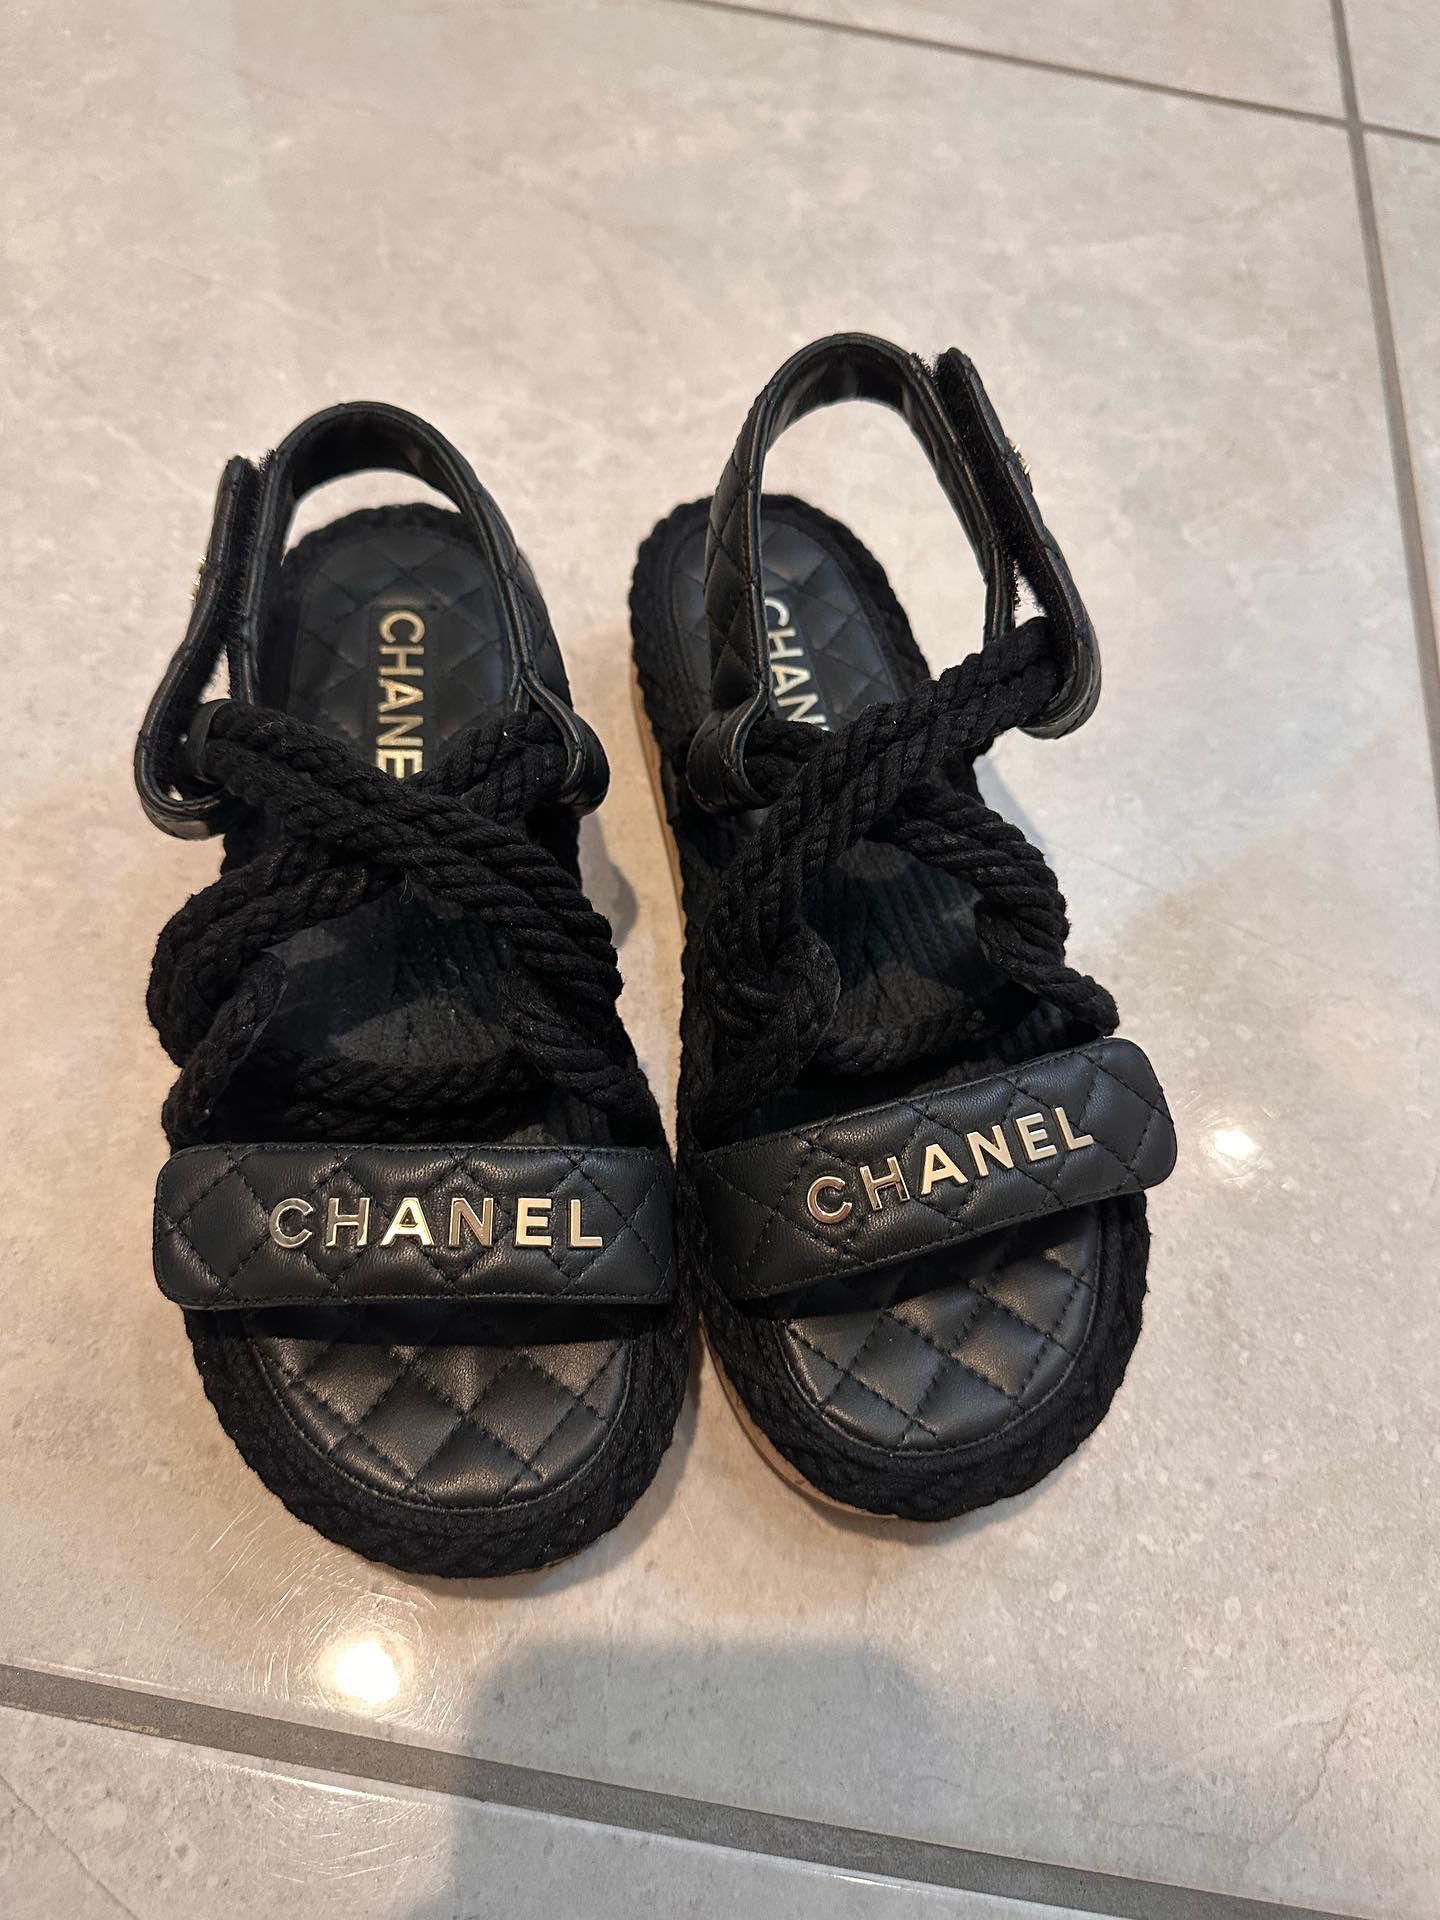 Chanel Sandals size 37 for Sale in Las Vegas, NV - OfferUp